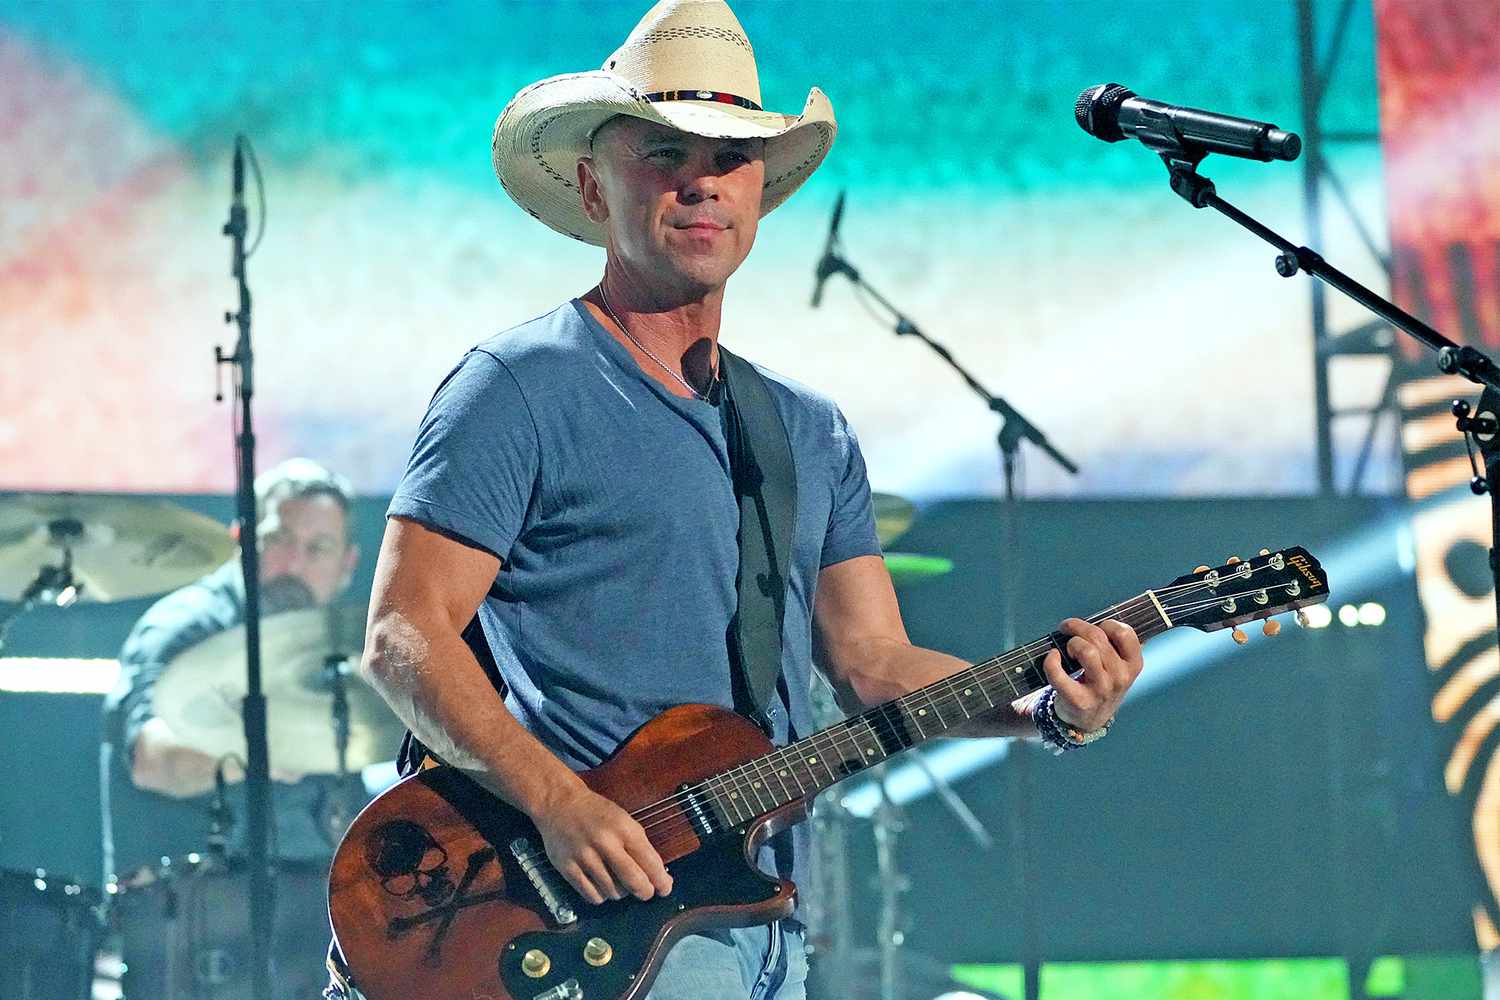 NASHVILLE, TENNESSEE - APRIL 11: Kenny Chesney performs at the 2022 CMT Music Awards at Nashville Municipal Auditorium on April 11, 2022 in Nashville, Tennessee. (Photo by Kevin Mazur/Getty Images for CMT)